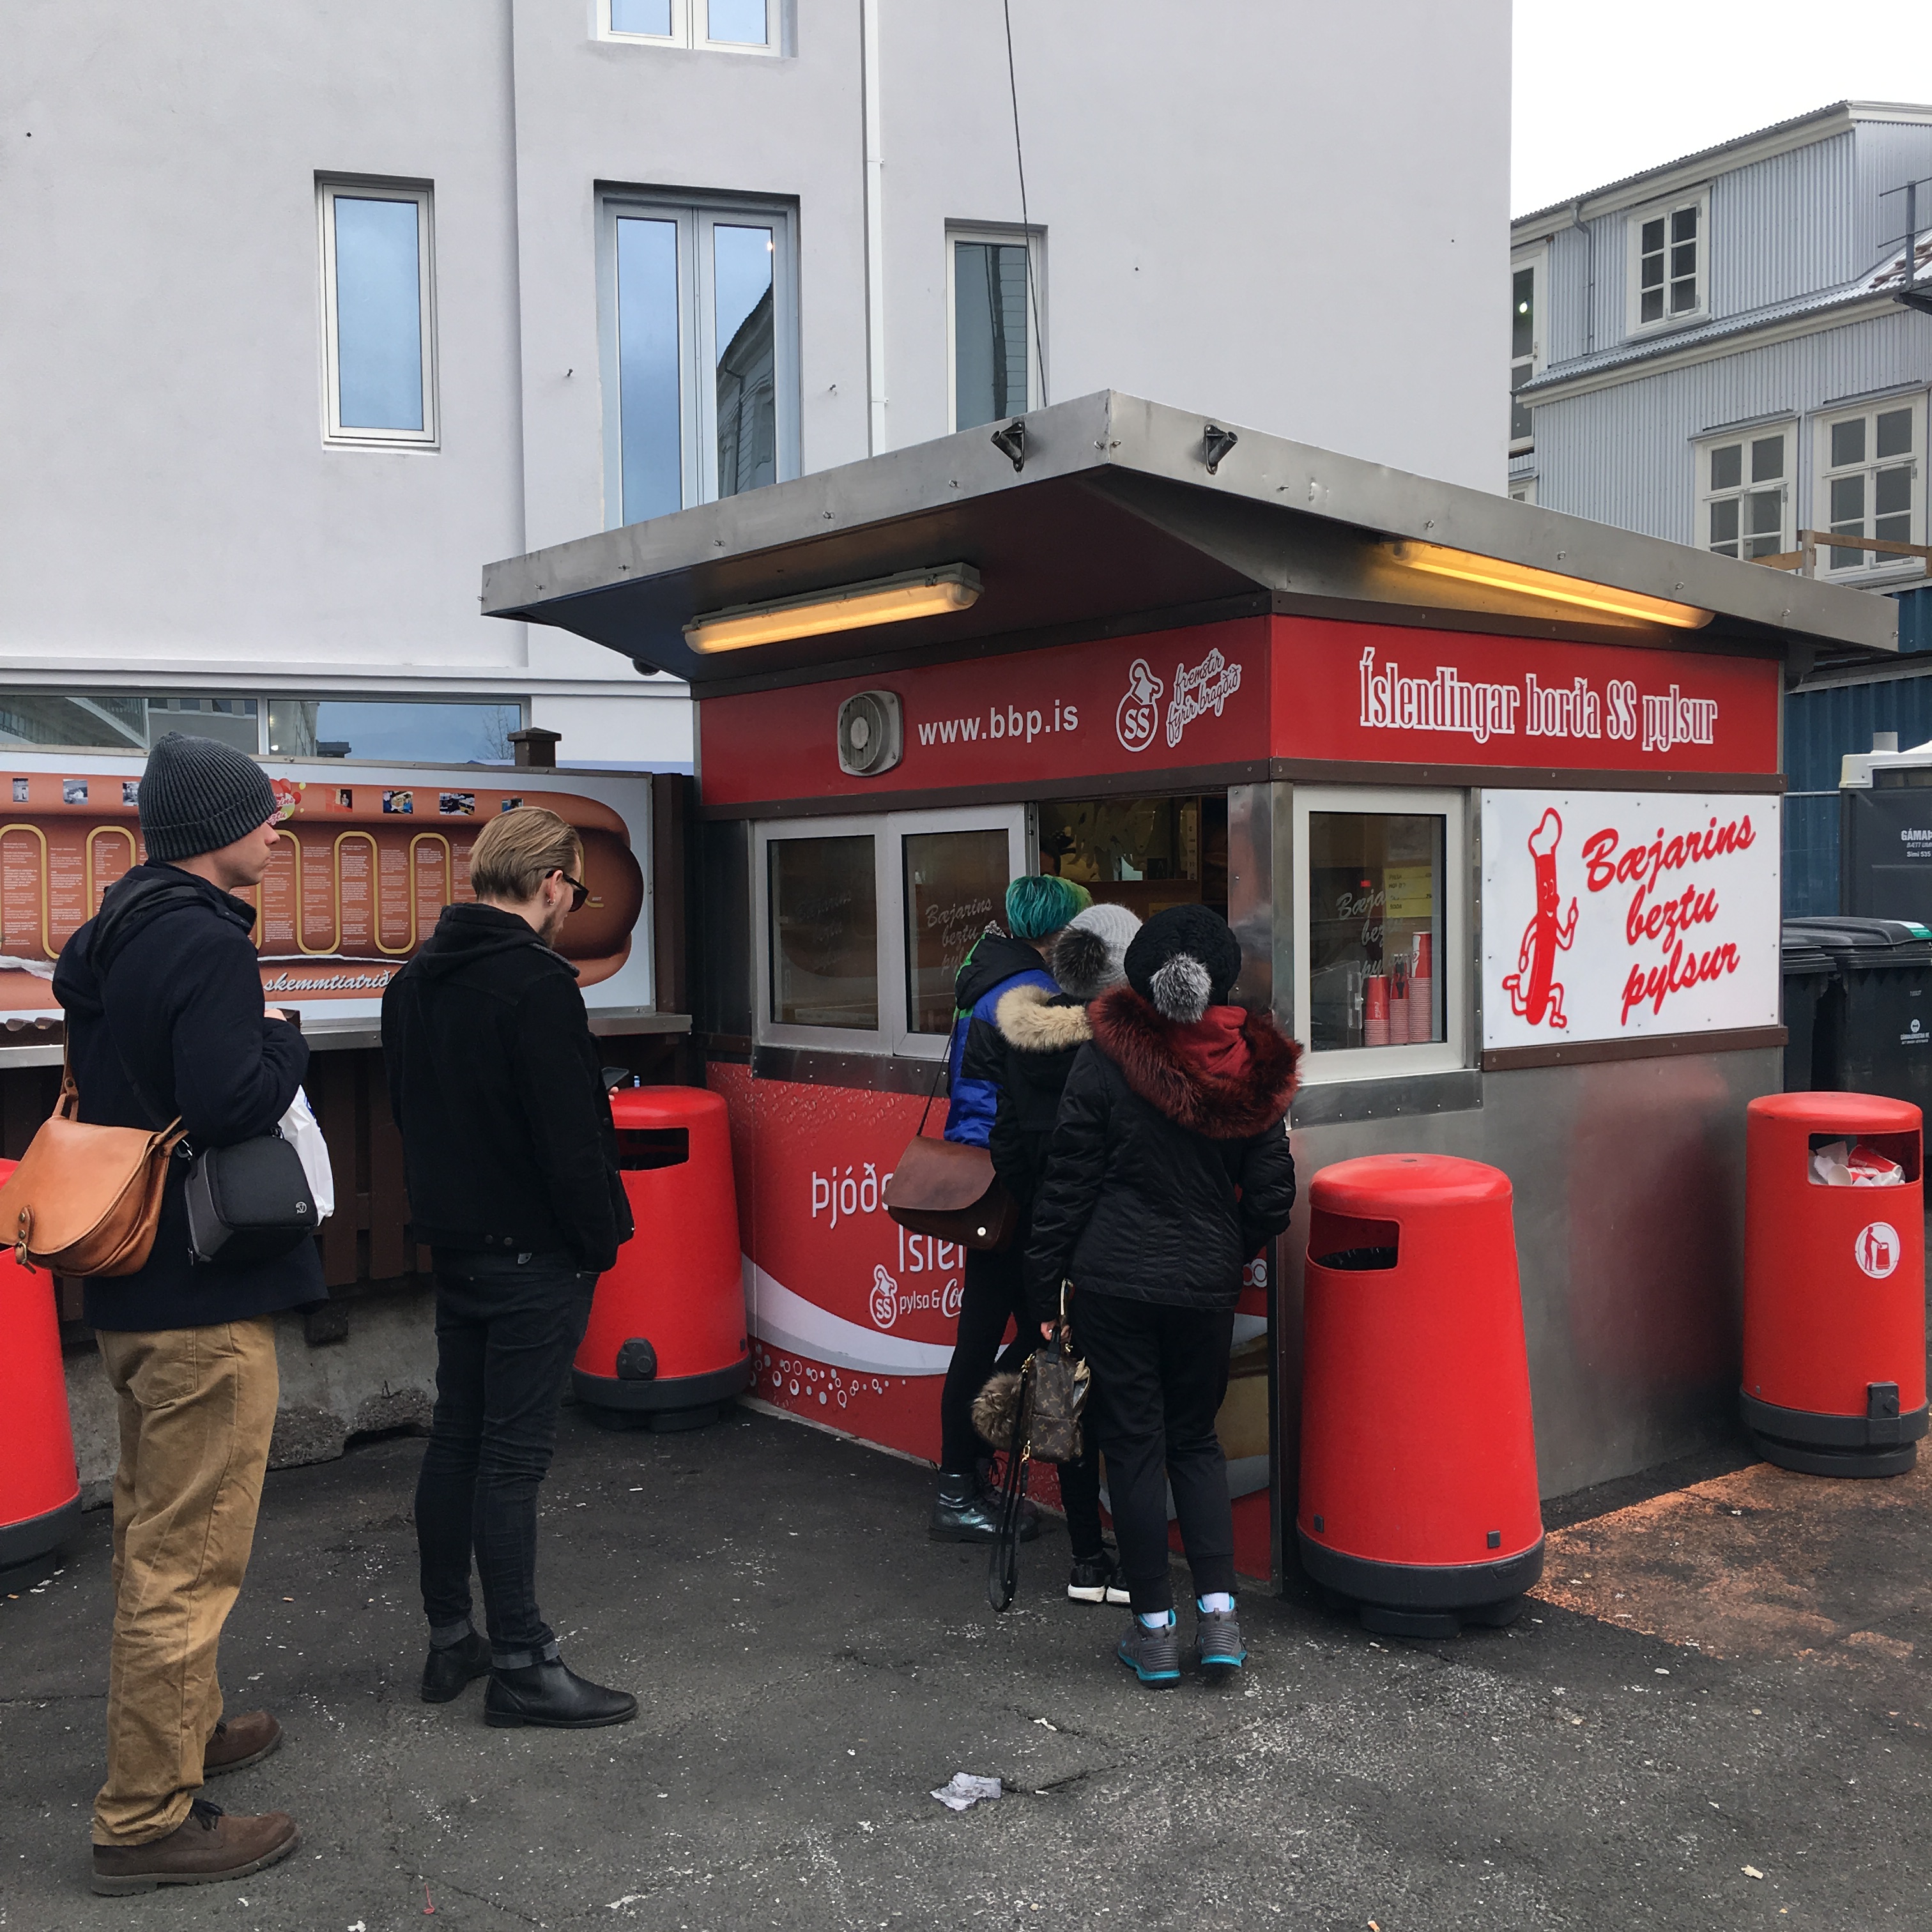 The best hot dogs in Iceland